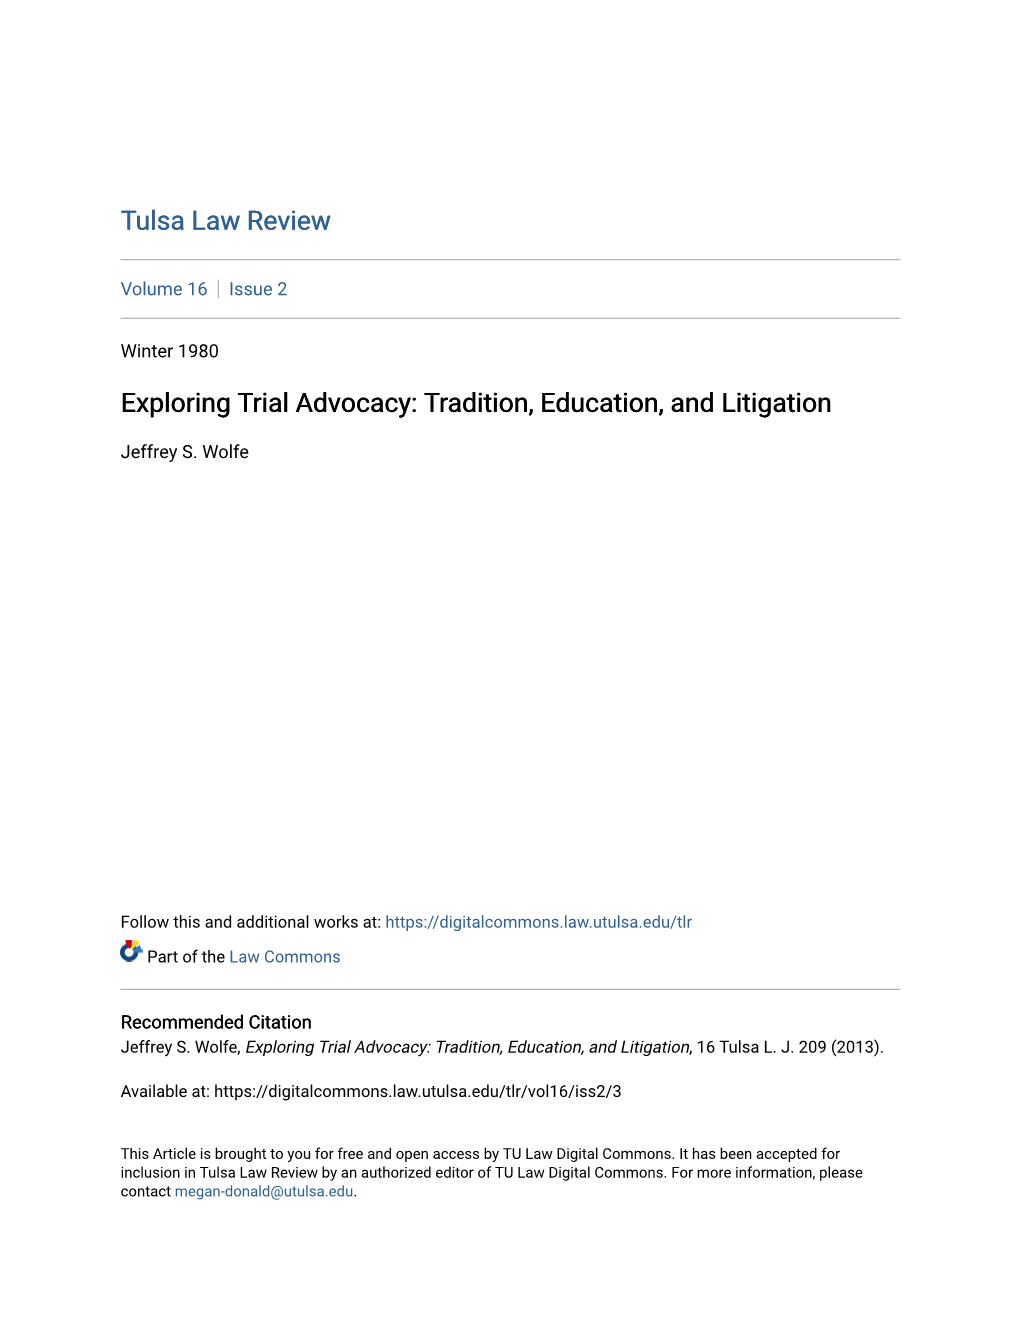 Exploring Trial Advocacy: Tradition, Education, and Litigation